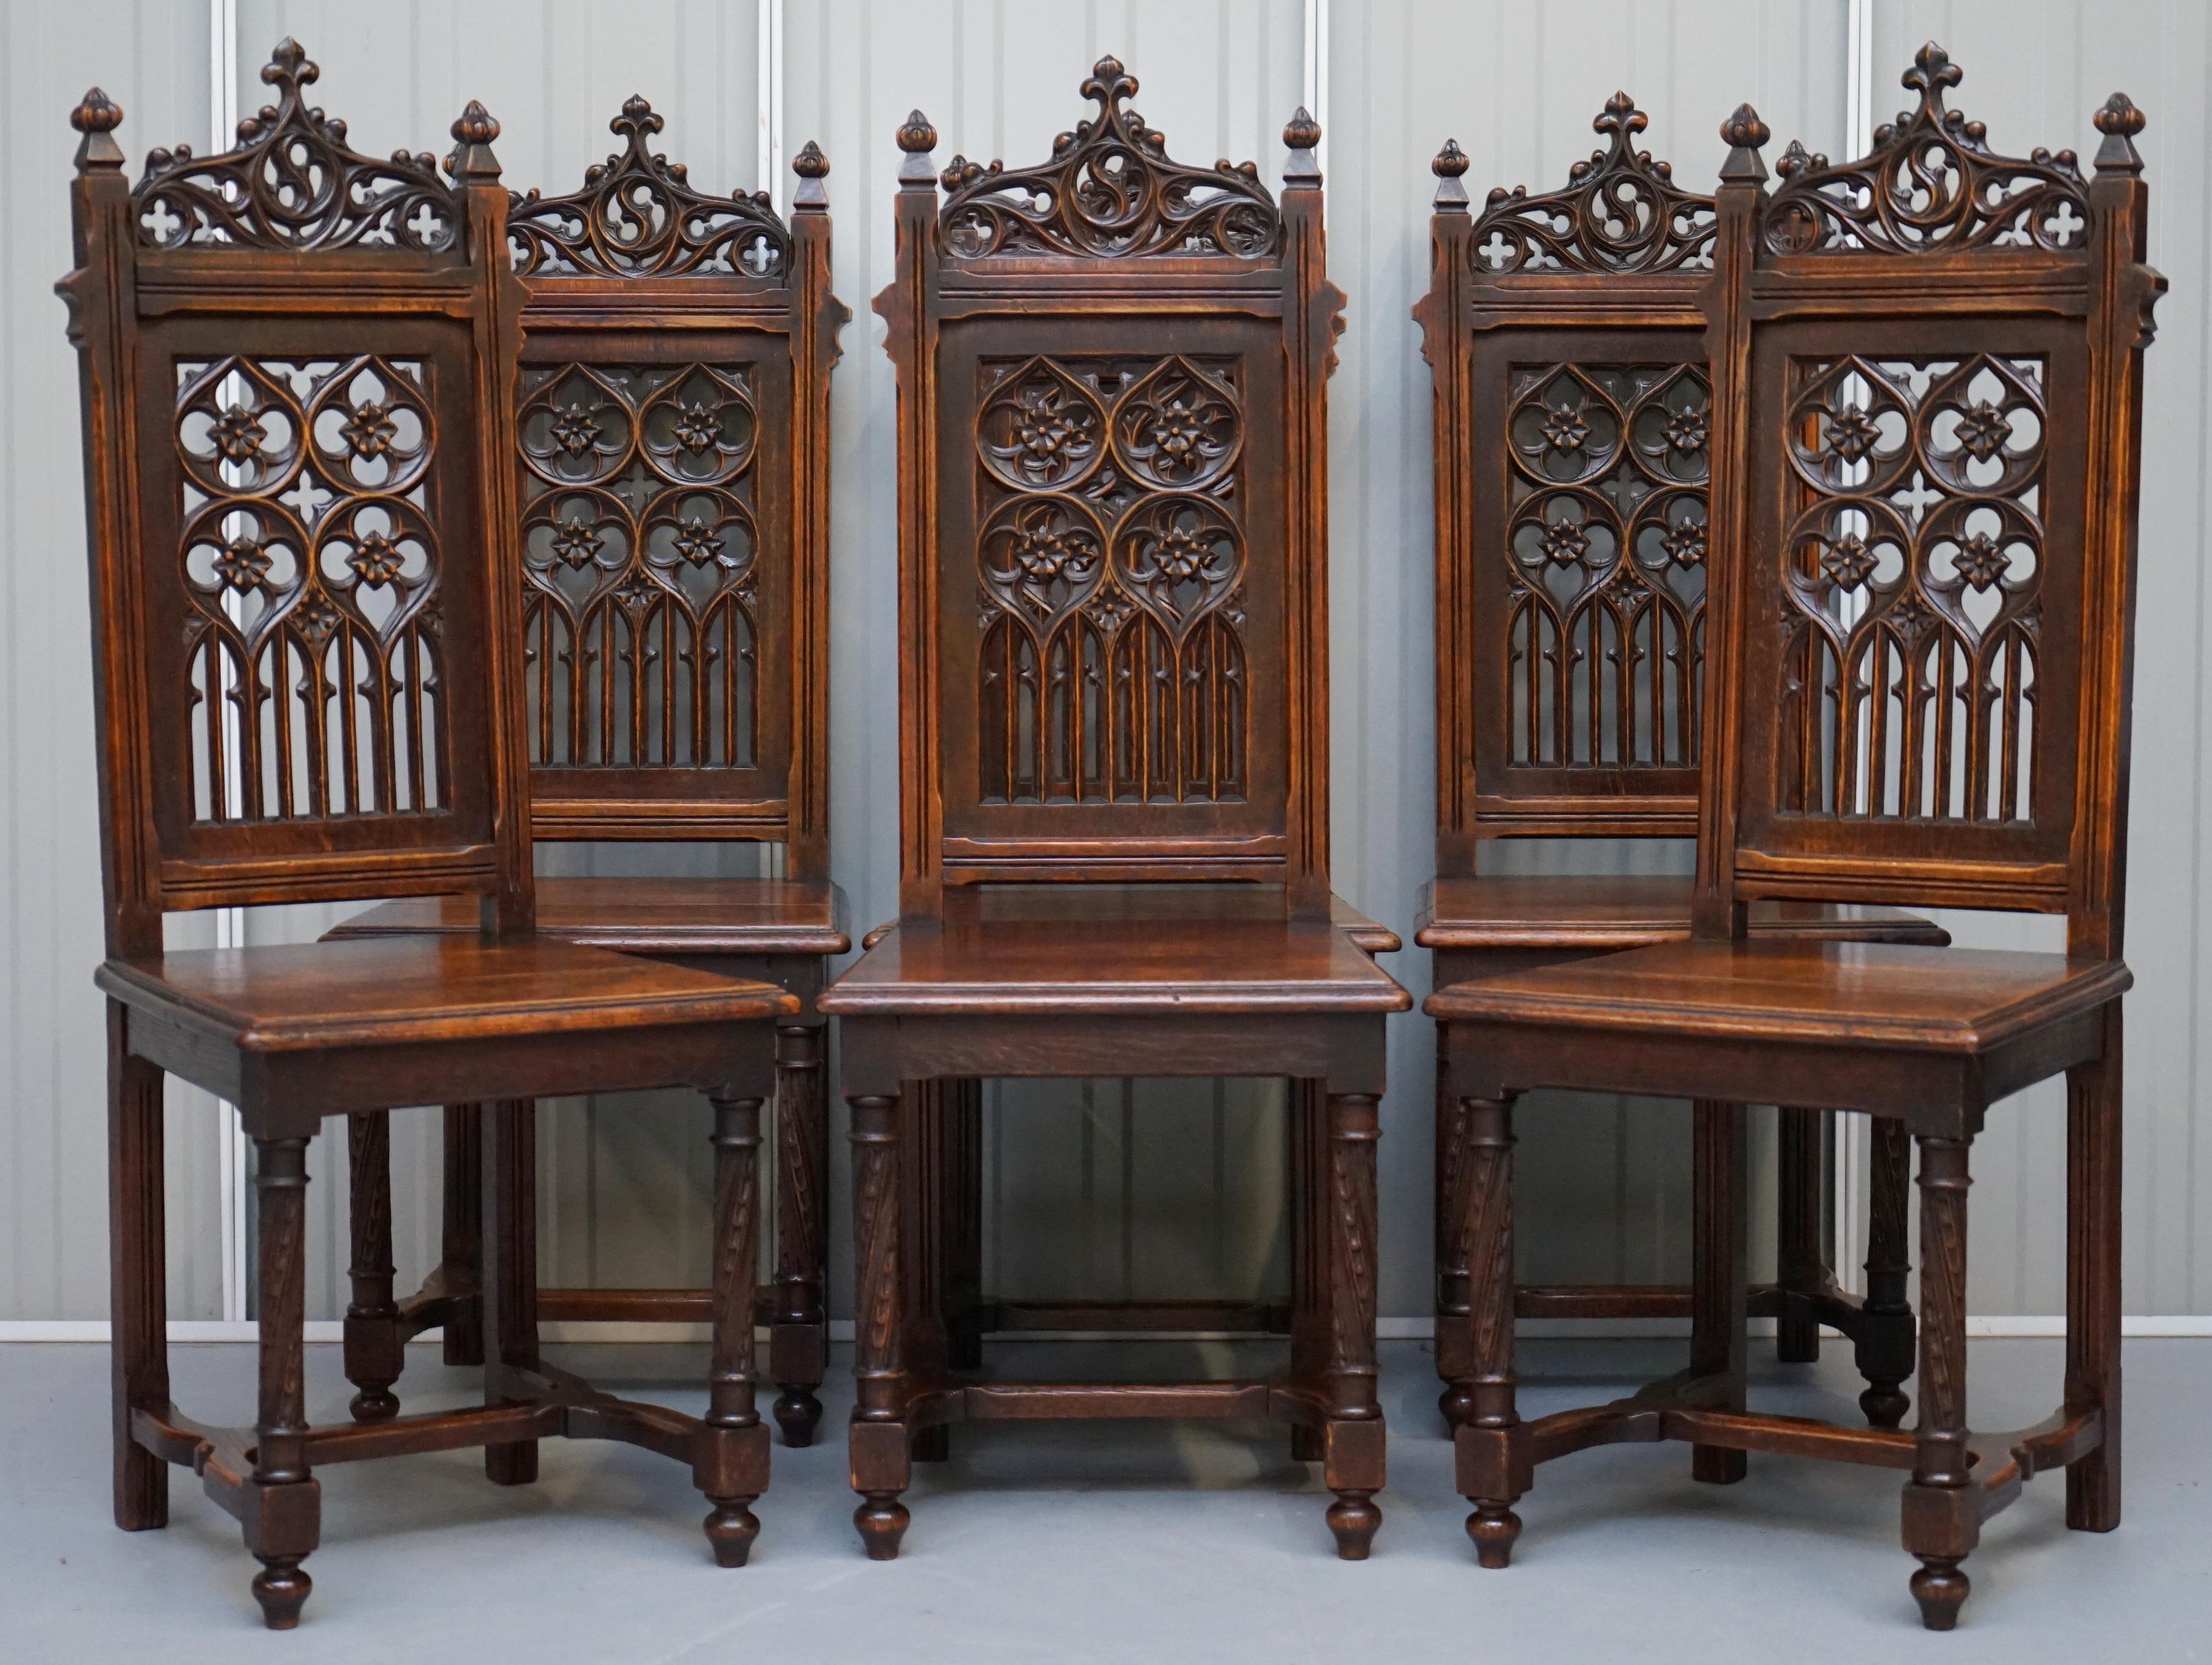 We are delighted to offer for sale this exceptionally rare and absolutely stunning set of eight large Gothic revival dining chairs, circa 1780.

I have never seen another set of this quality before, they are expertly and rather ornately carved to